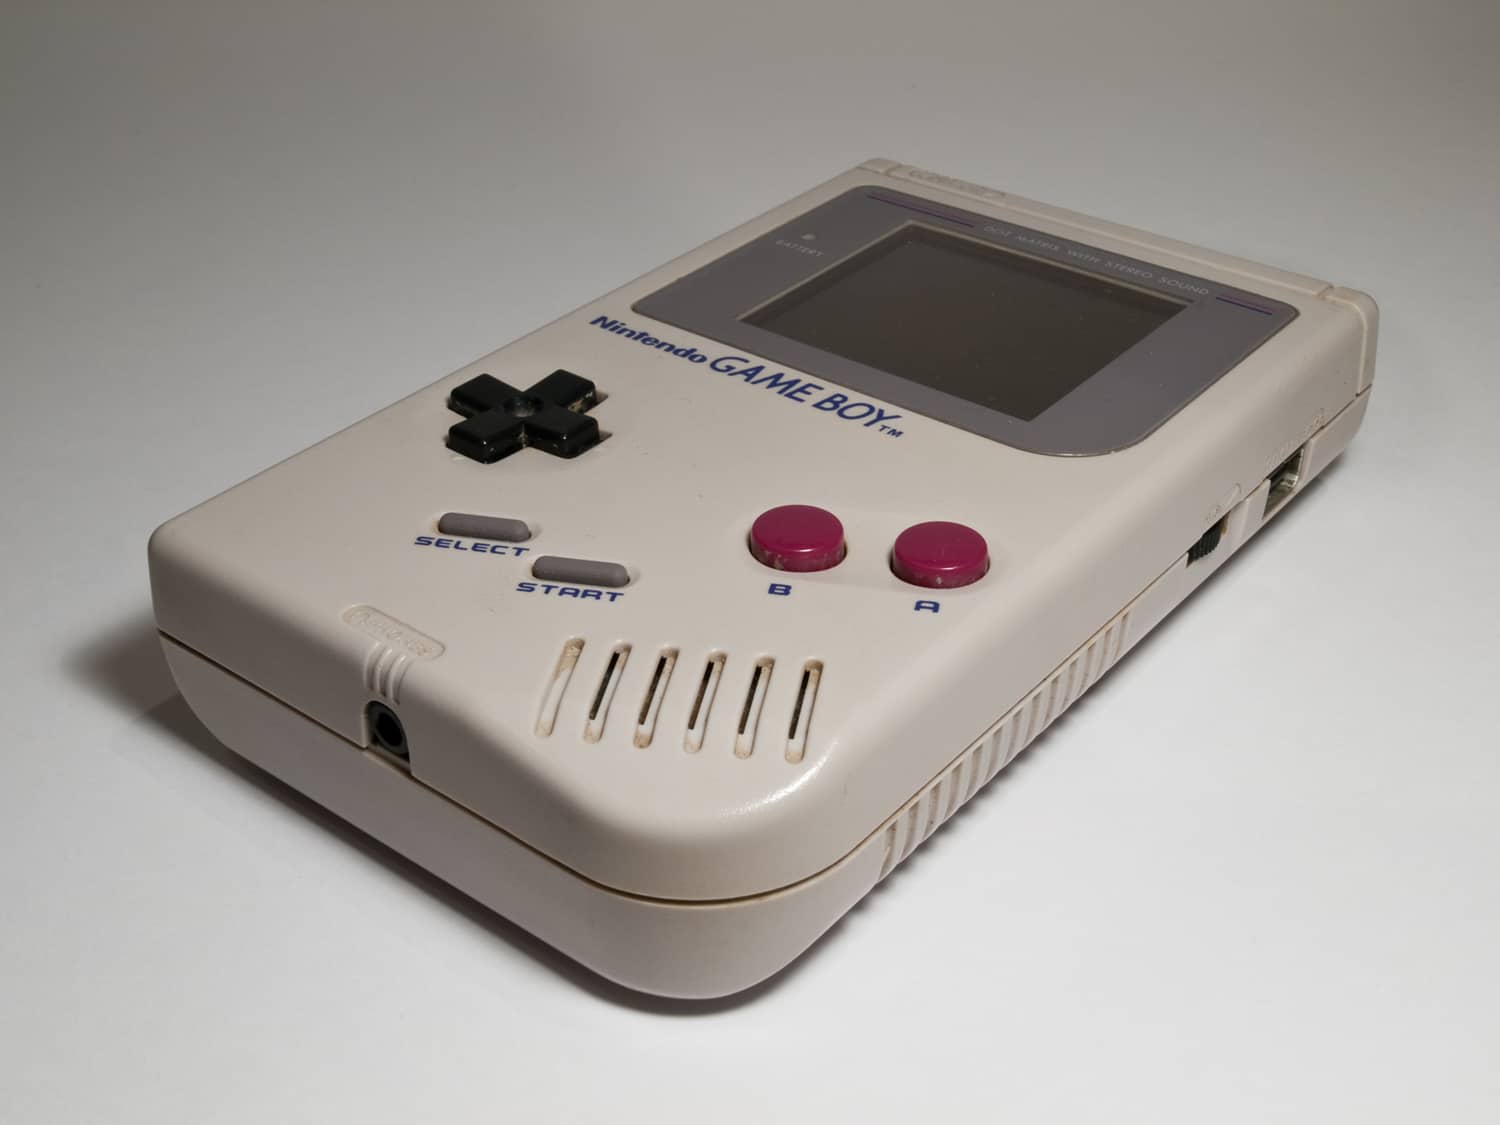 Nintendo Game Boy, It has a brilliant greenish screen and dark colored 8-bit graphics and stereo sound that were the dreams and nightmares of any true gamer of the age.